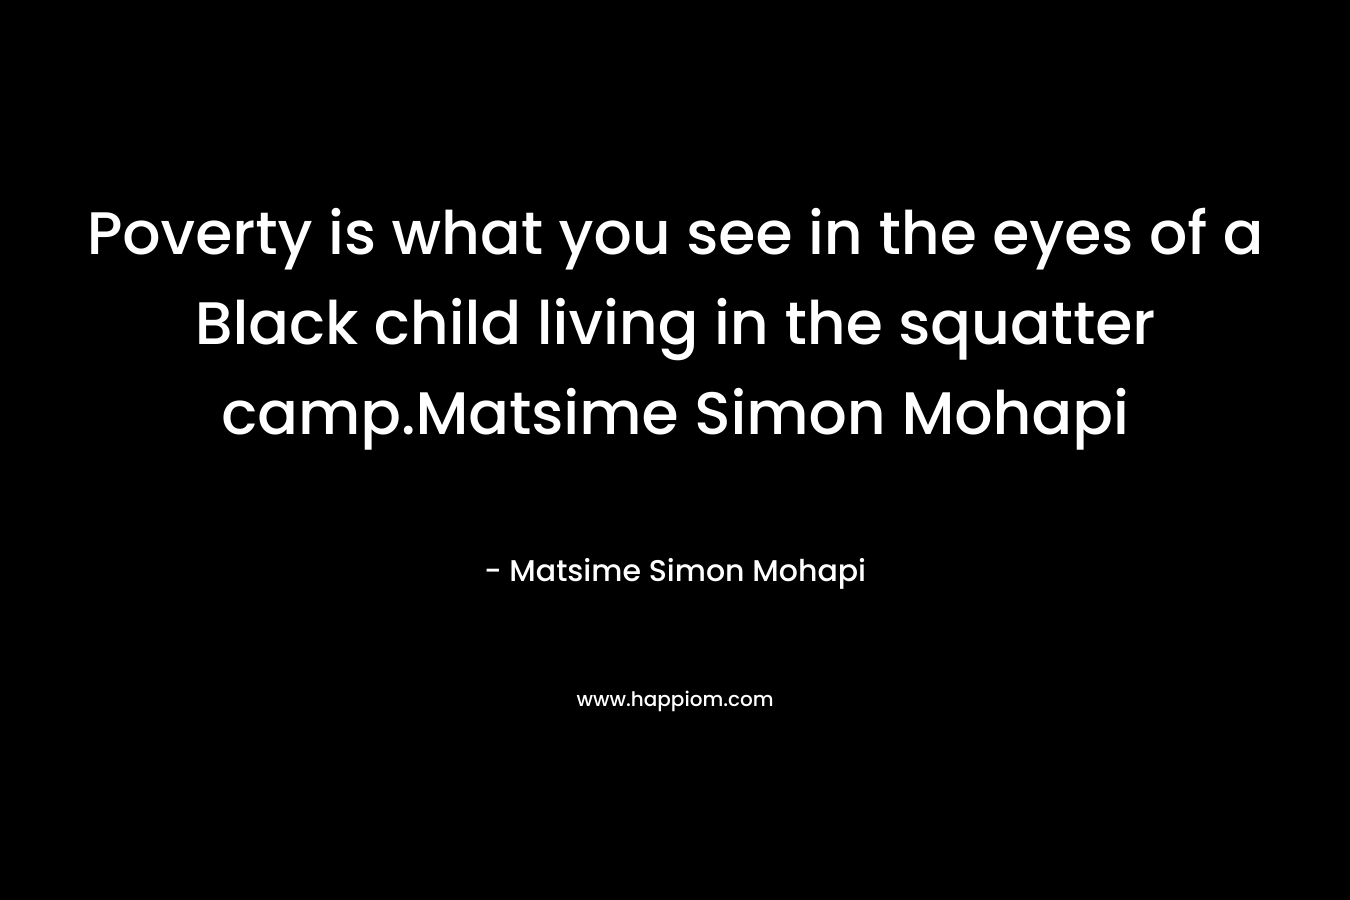 Poverty is what you see in the eyes of a Black child living in the squatter camp.Matsime Simon Mohapi